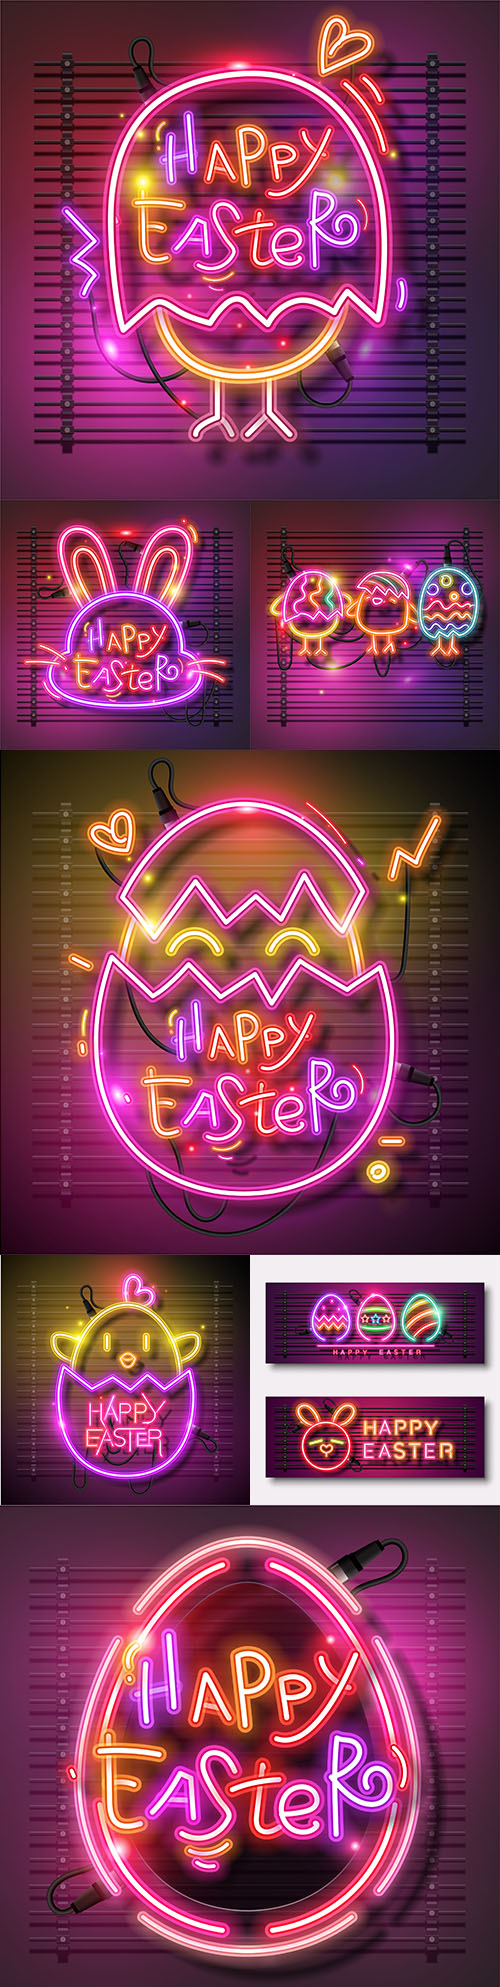 Happy Easter design banner with neon eggs illustration
